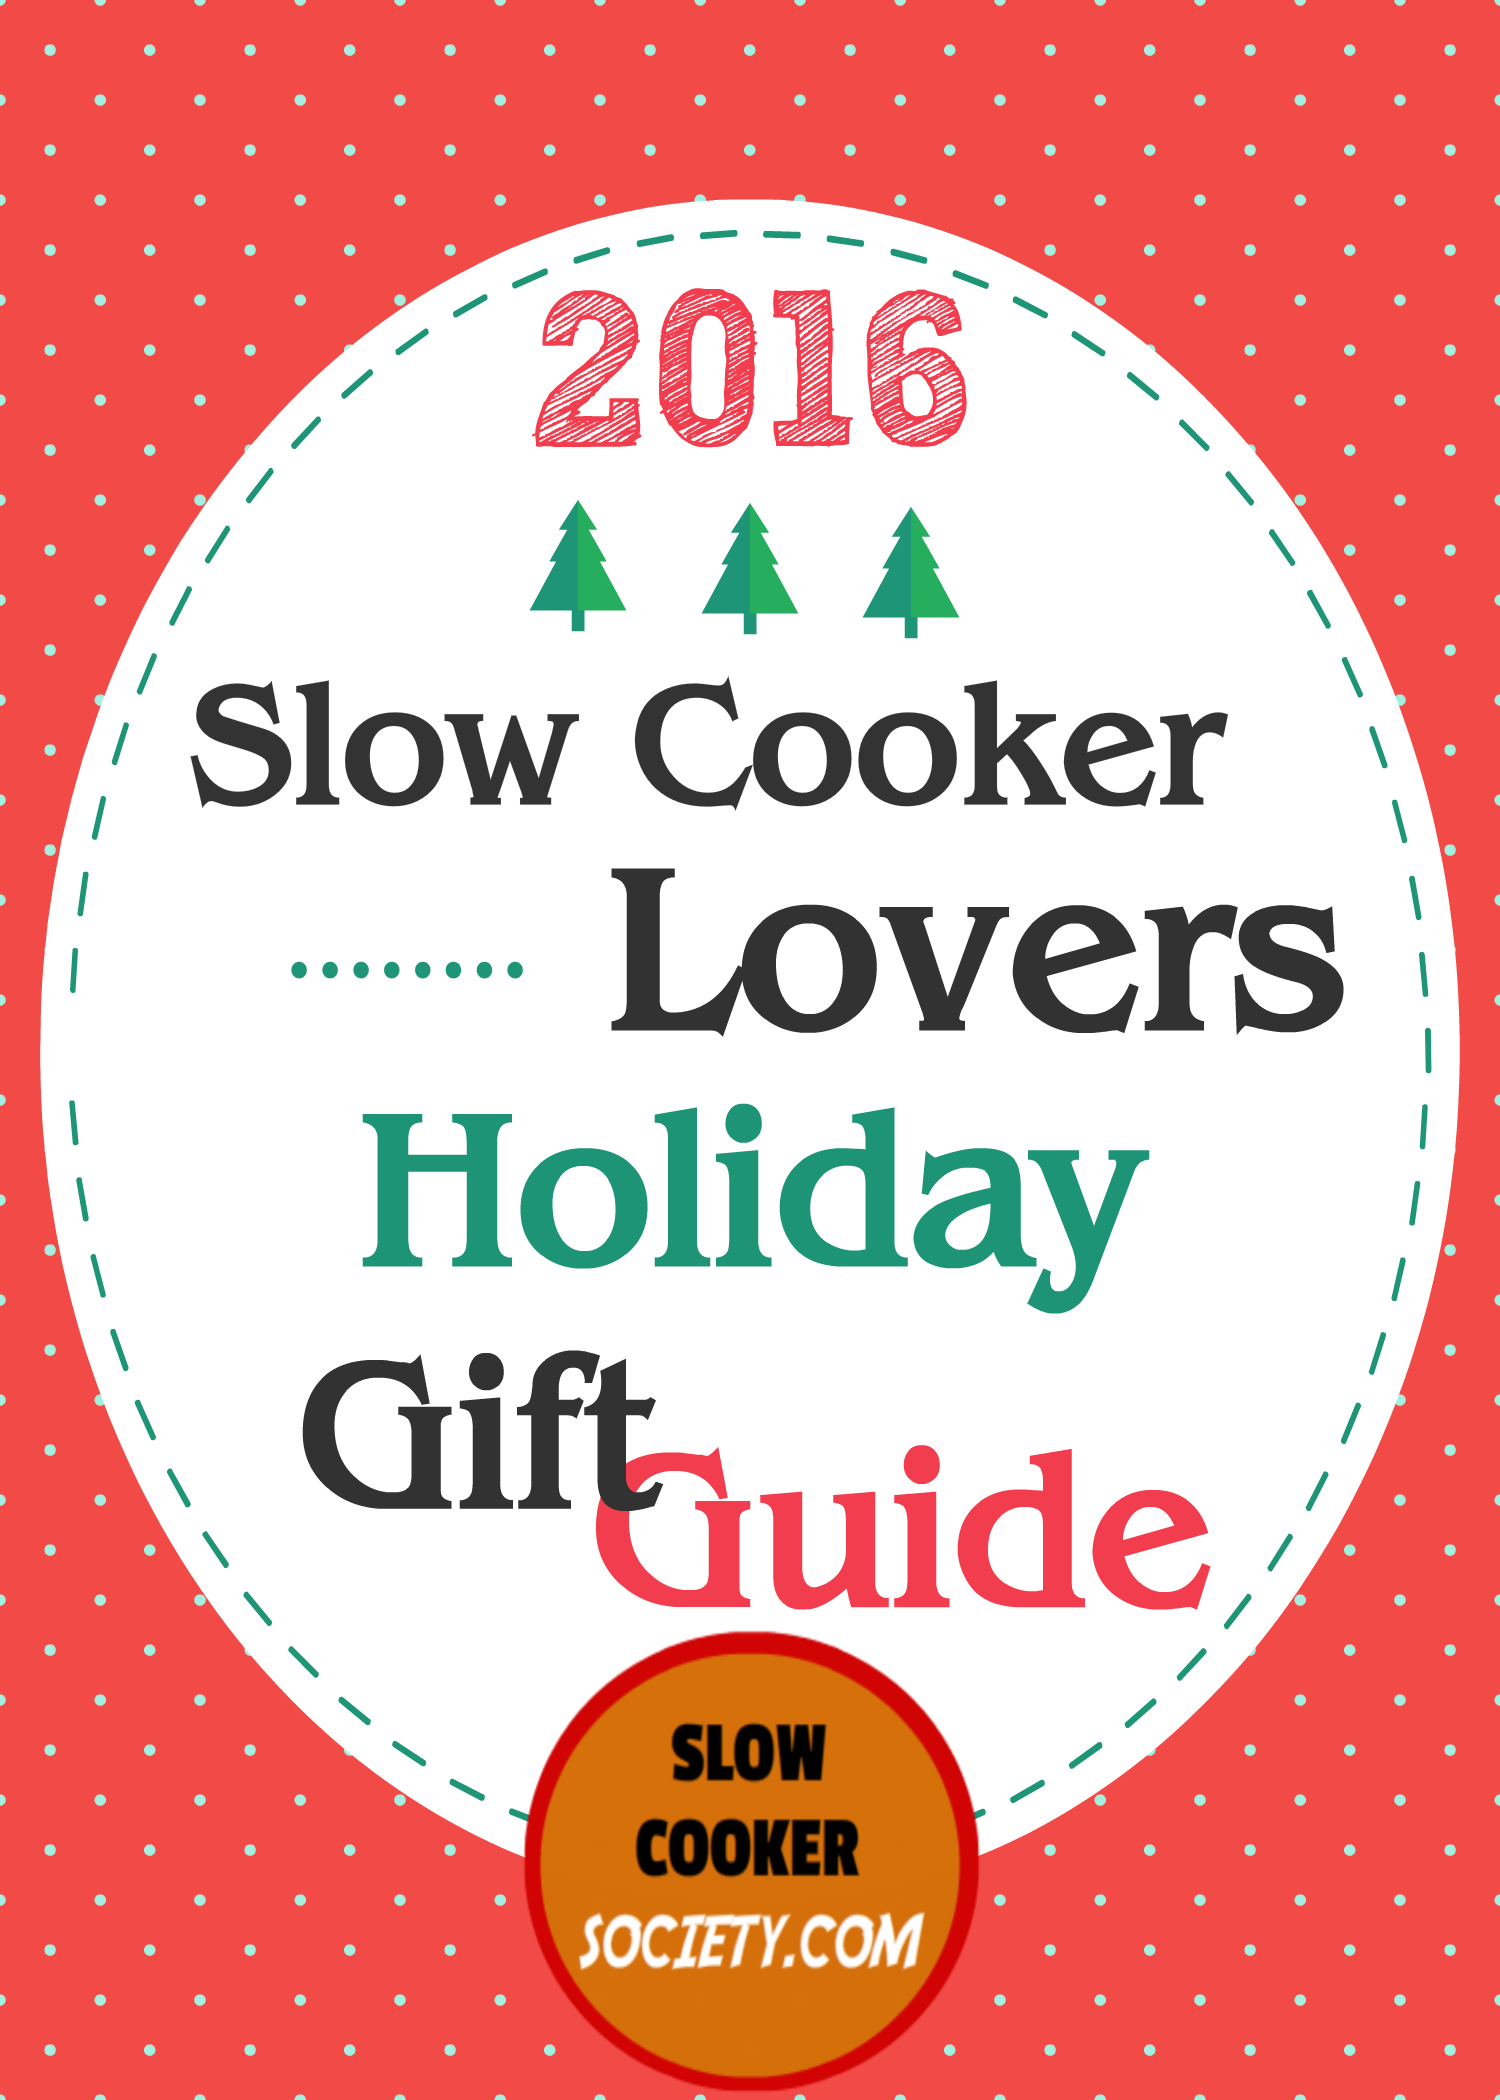 slow-cooker-society-holiday-gifts-ideas11